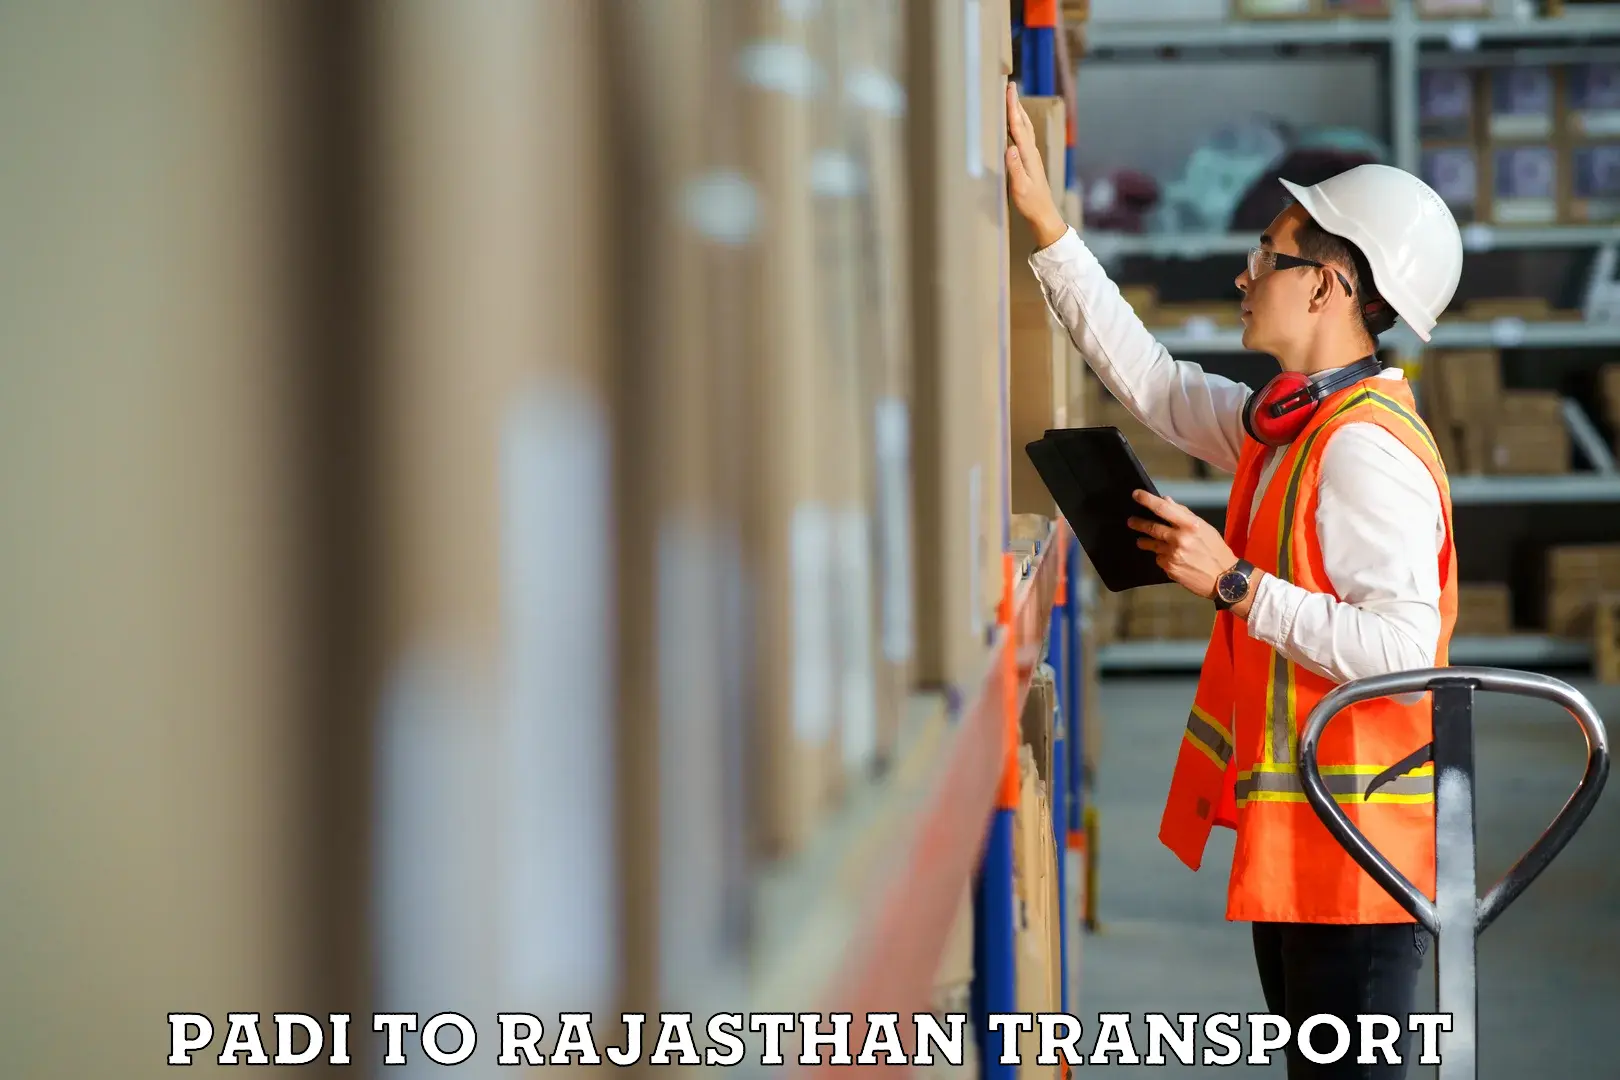 Commercial transport service Padi to Jaipur